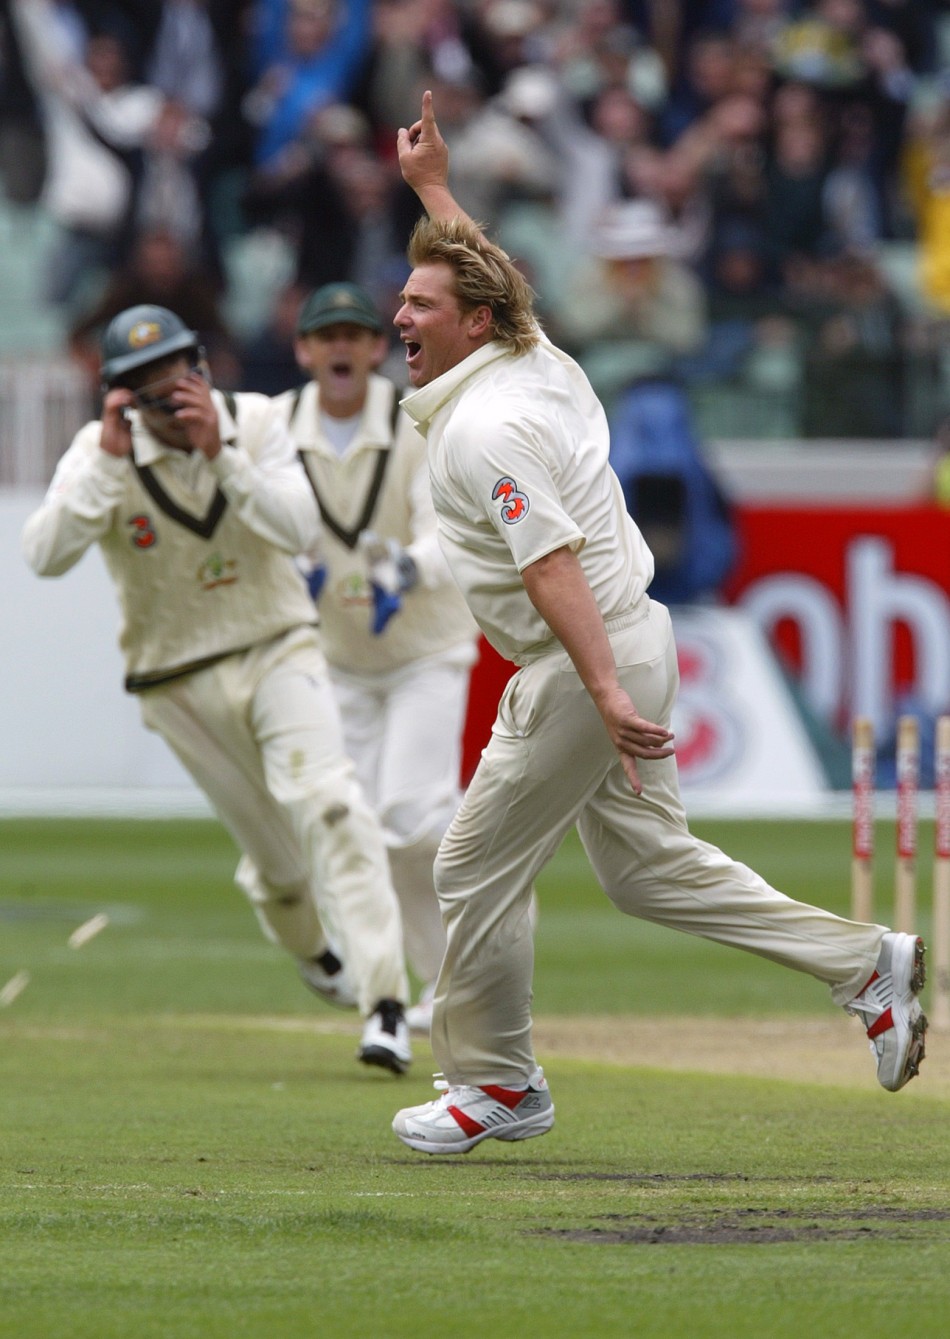 Warne wheels away becoming the first bowler to reach 700 wickets during the first day of the fourth Ashes cricket test between Australia and England at the Melbourne Cricket Ground December 26, 2006.